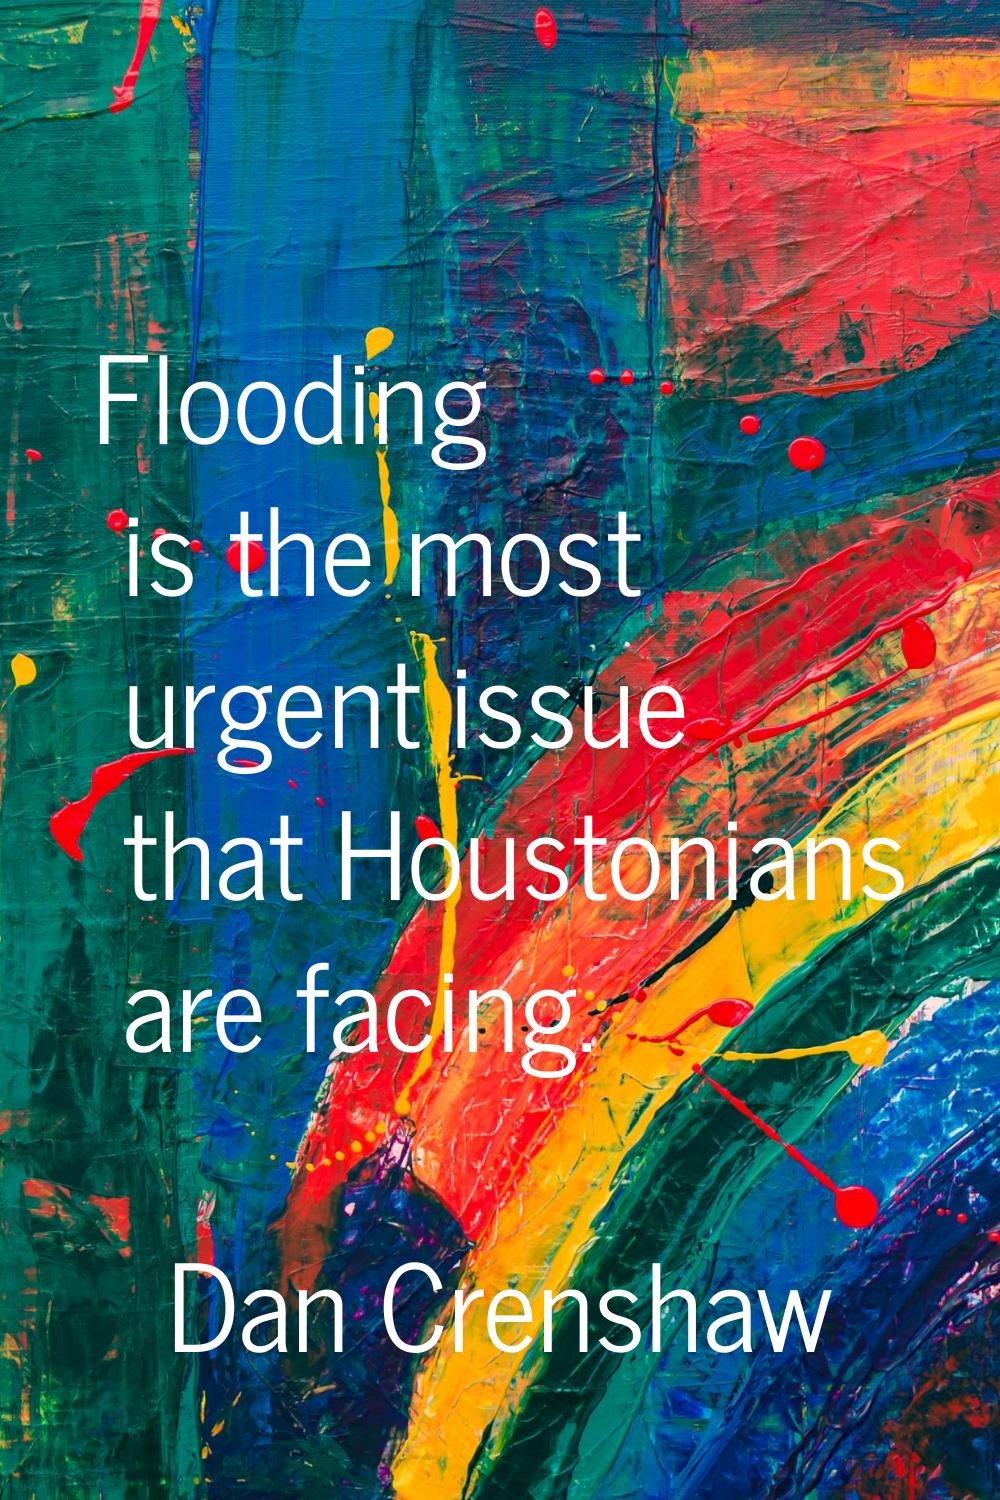 Flooding is the most urgent issue that Houstonians are facing.